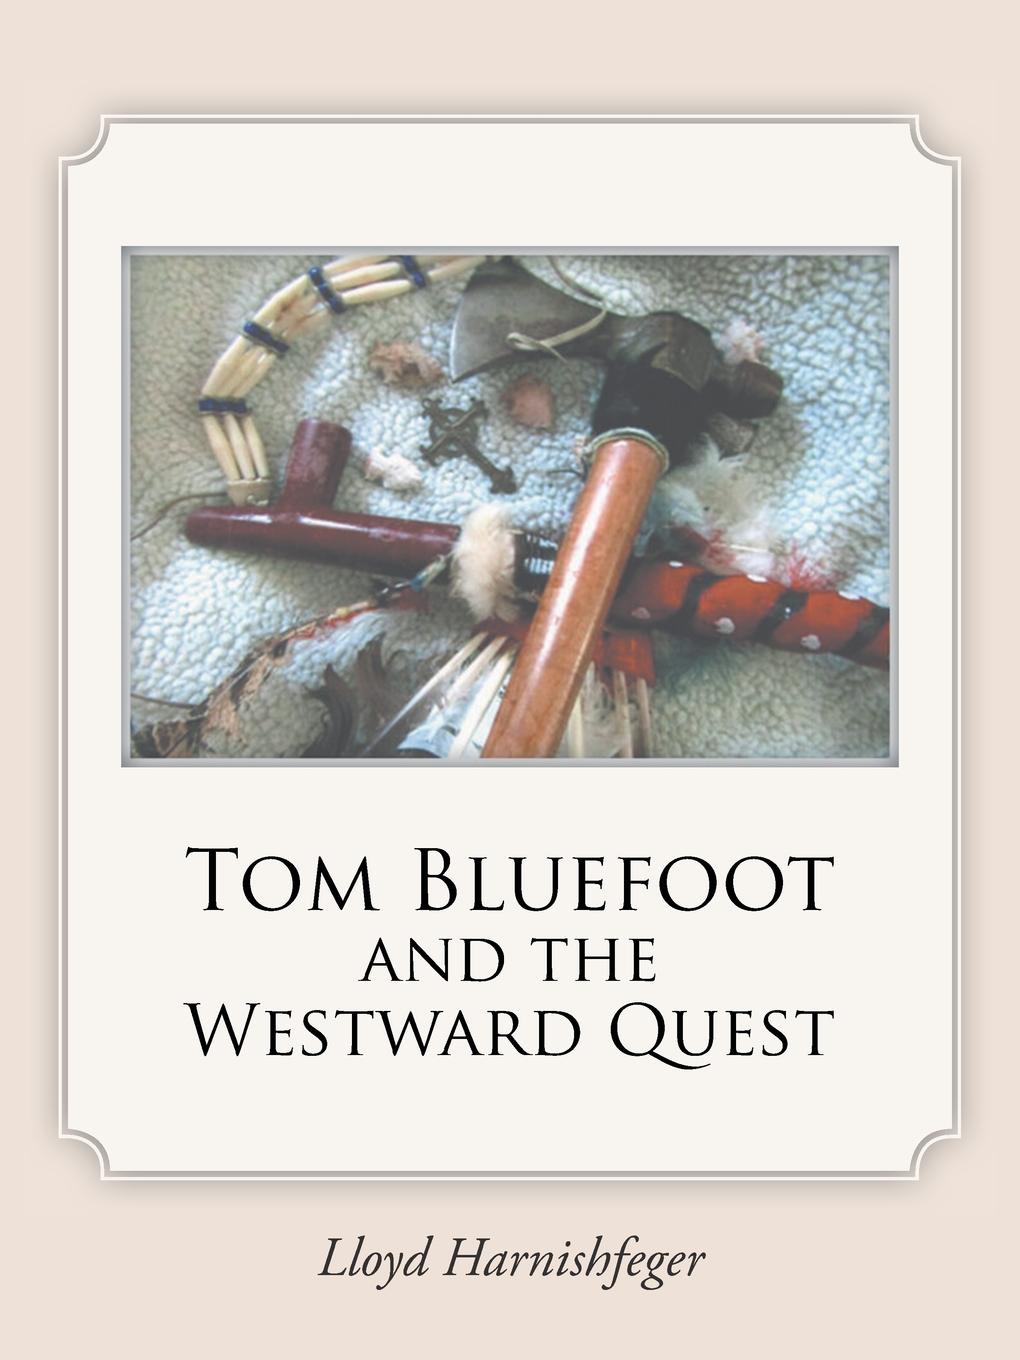 Tom Bluefoot and the Westward Quest